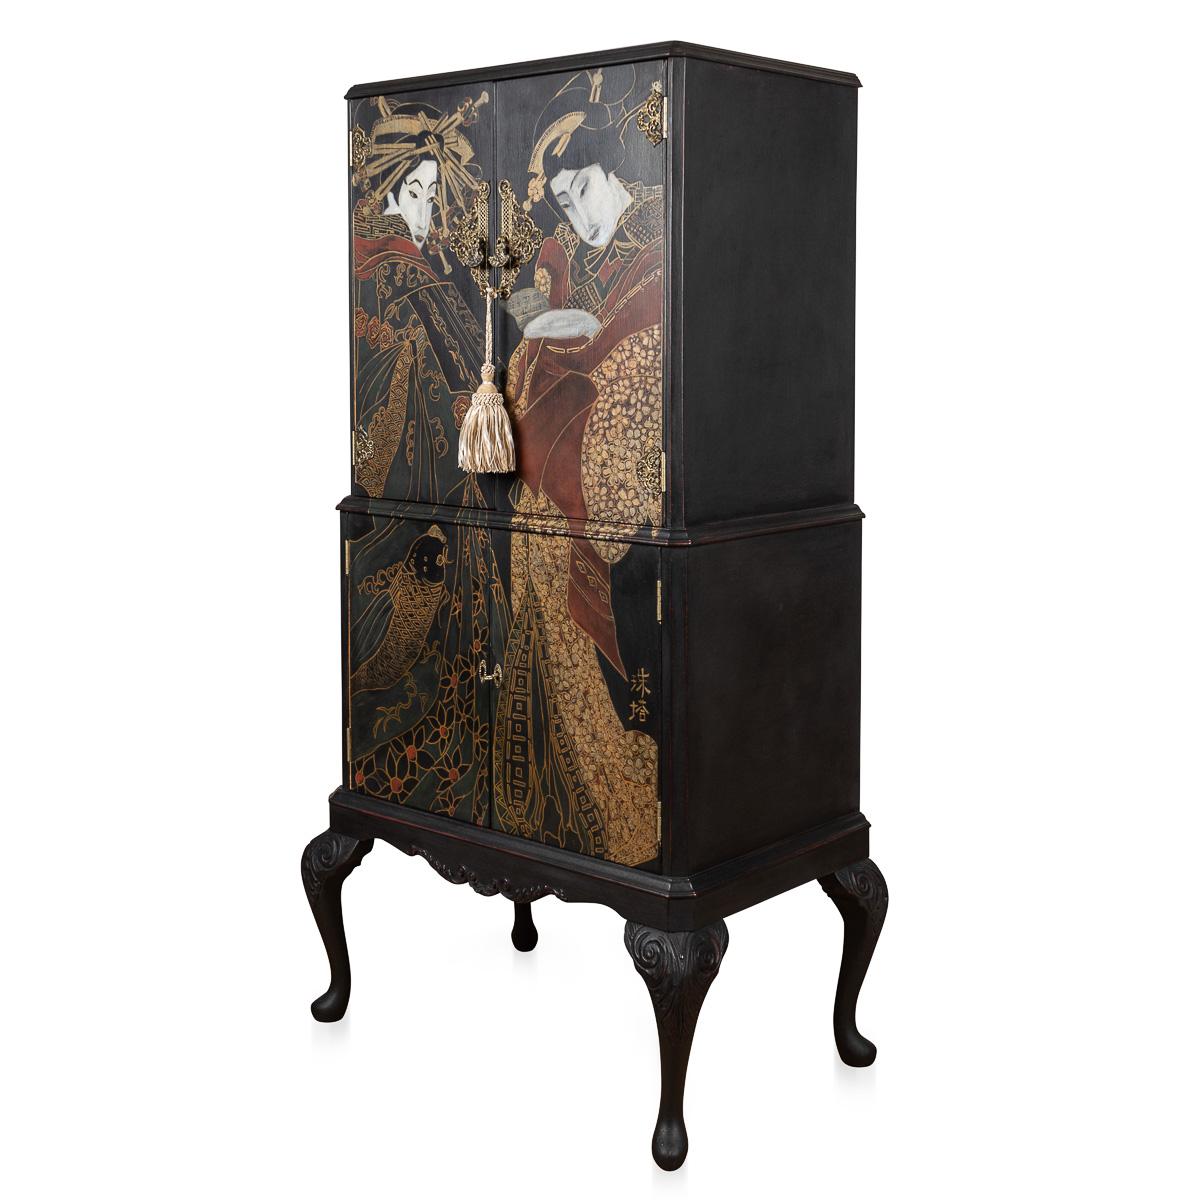 Japanese Japanesque Style Cocktail Cabinet Handpainted Depicting A 'Geisha' For Sale